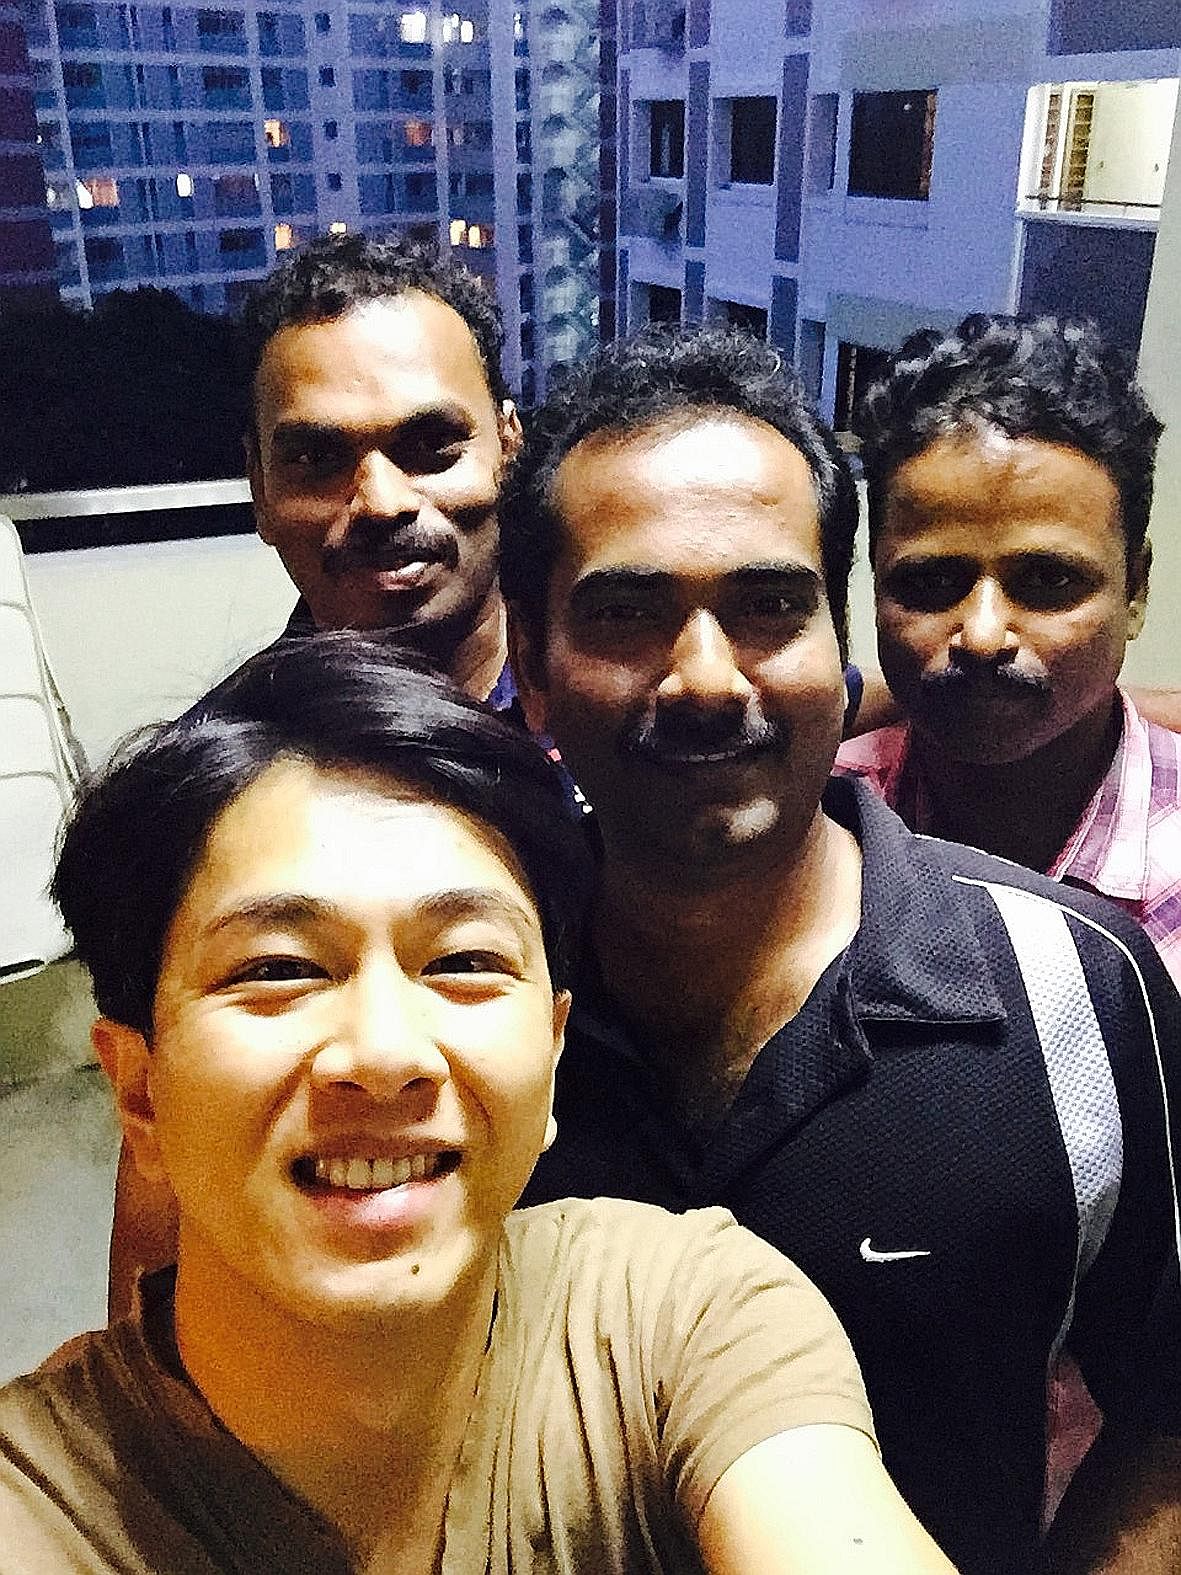 Mr Sugie Phua took a photo with the three men who returned his wallet.